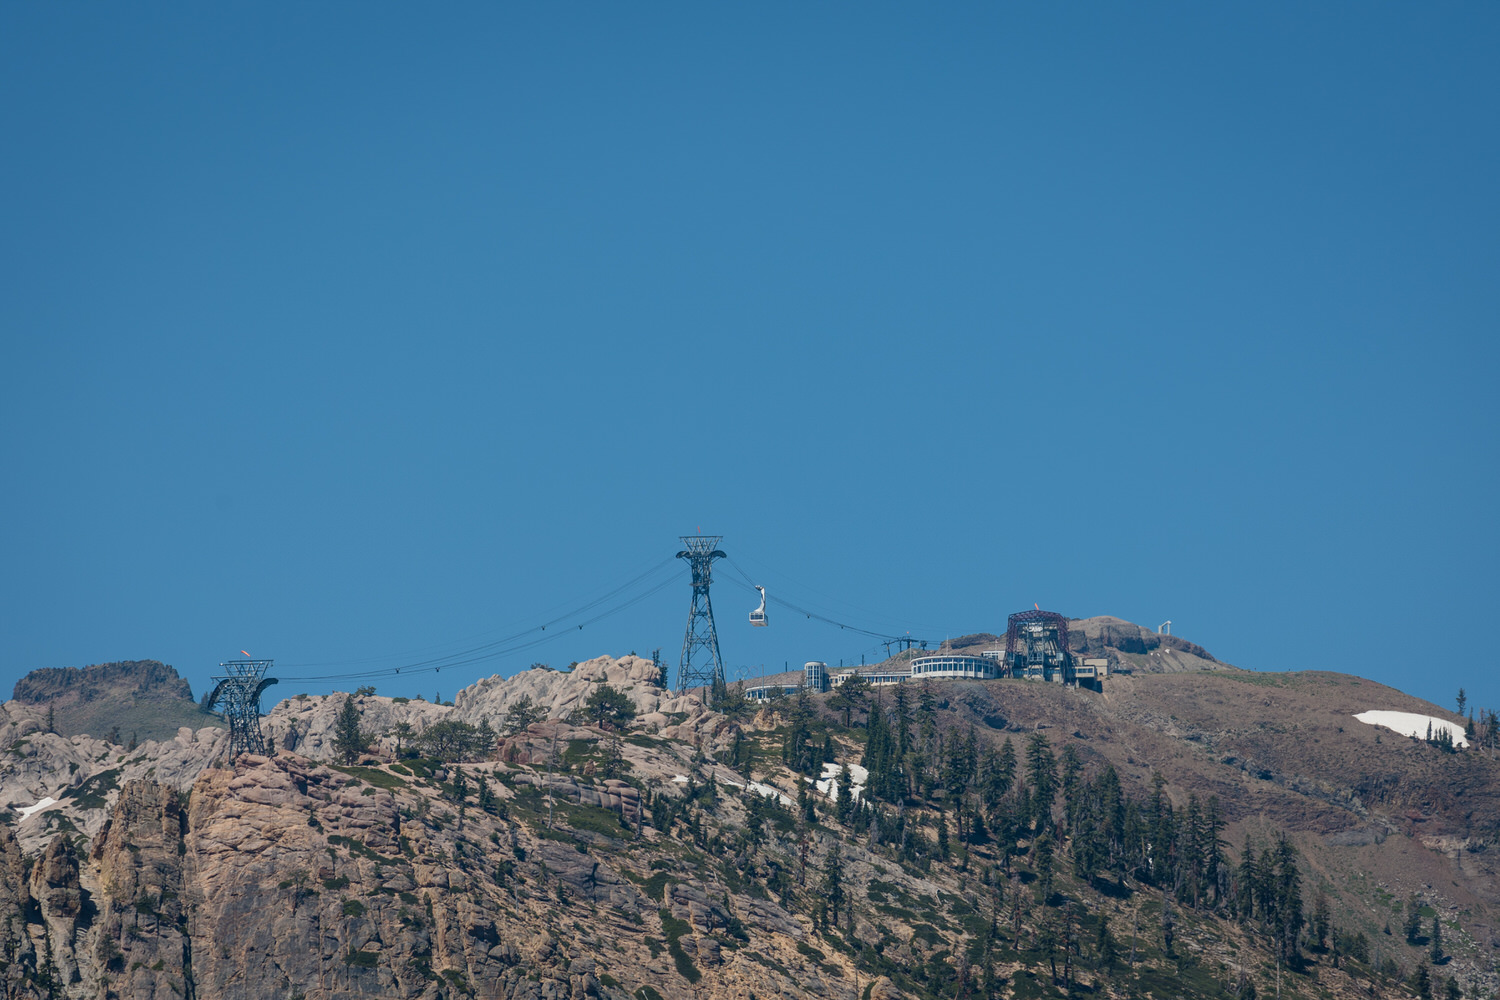 A telephoto view of High Camp at Palisades Tahoe and the aerial tram that transports wedding guests up the mountain.